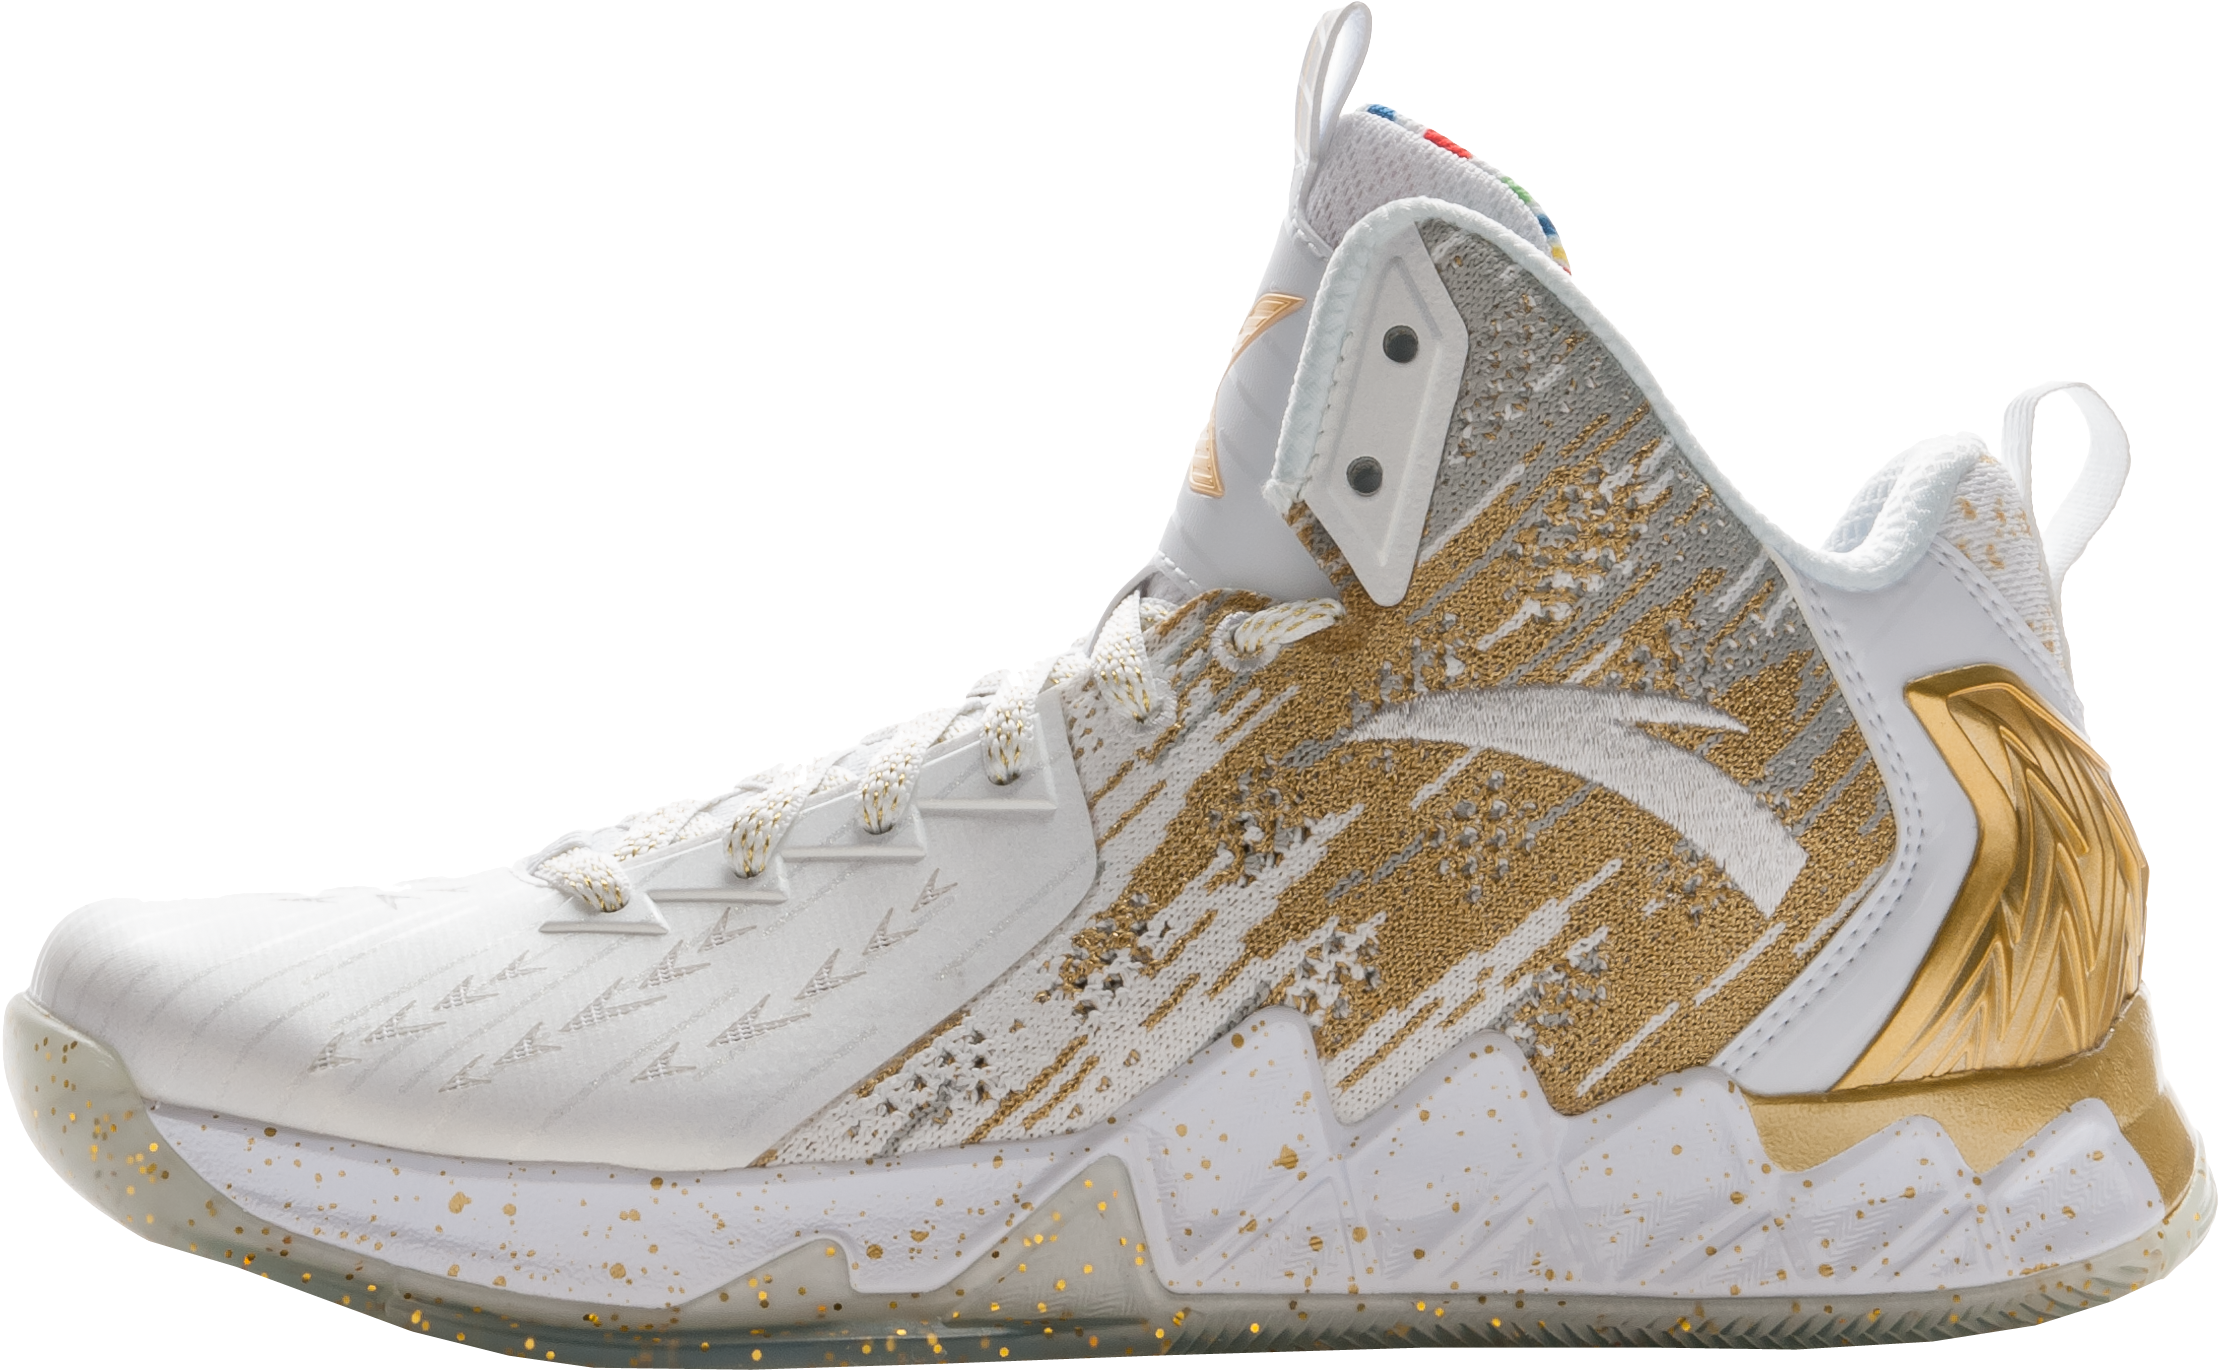 Gold Accented High Top Basketball Shoe